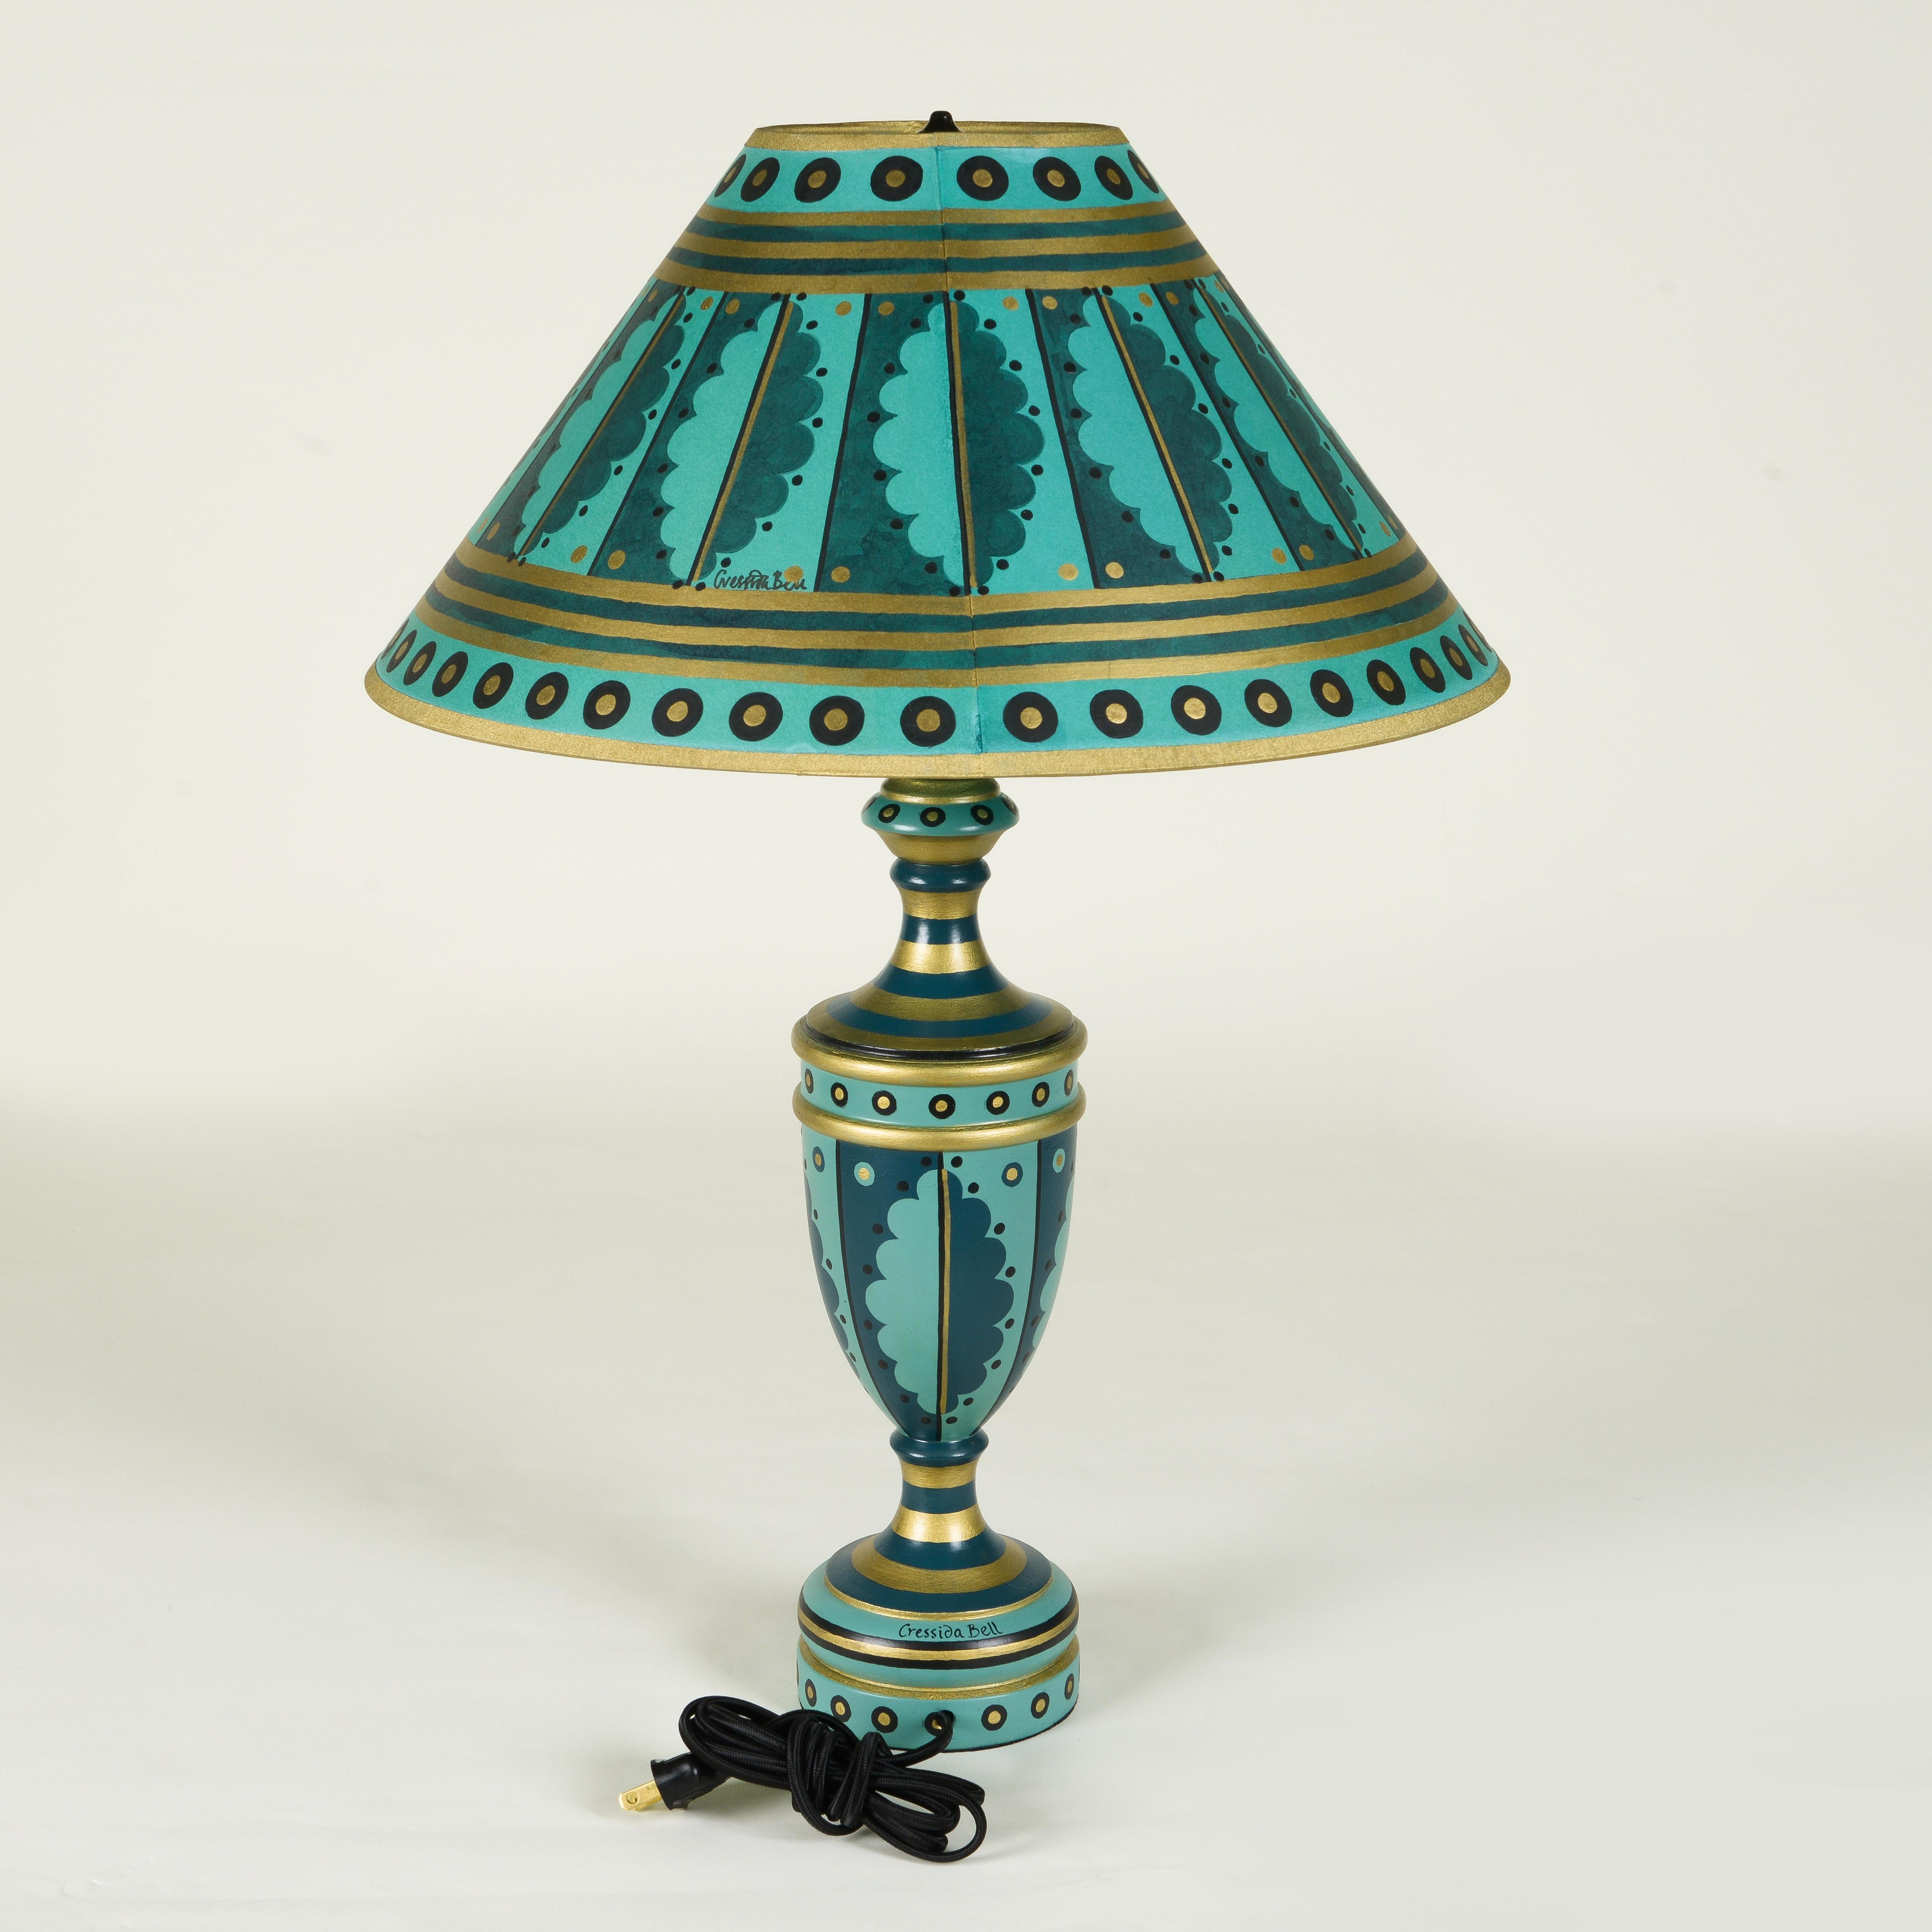 Hand-painted wooden base table lamp with matching shade adorned with different shades of blue, gold, and black.

Cressida Bell is a British designer specialising in textiles and interiors. From her London studio, she produces a wide range of